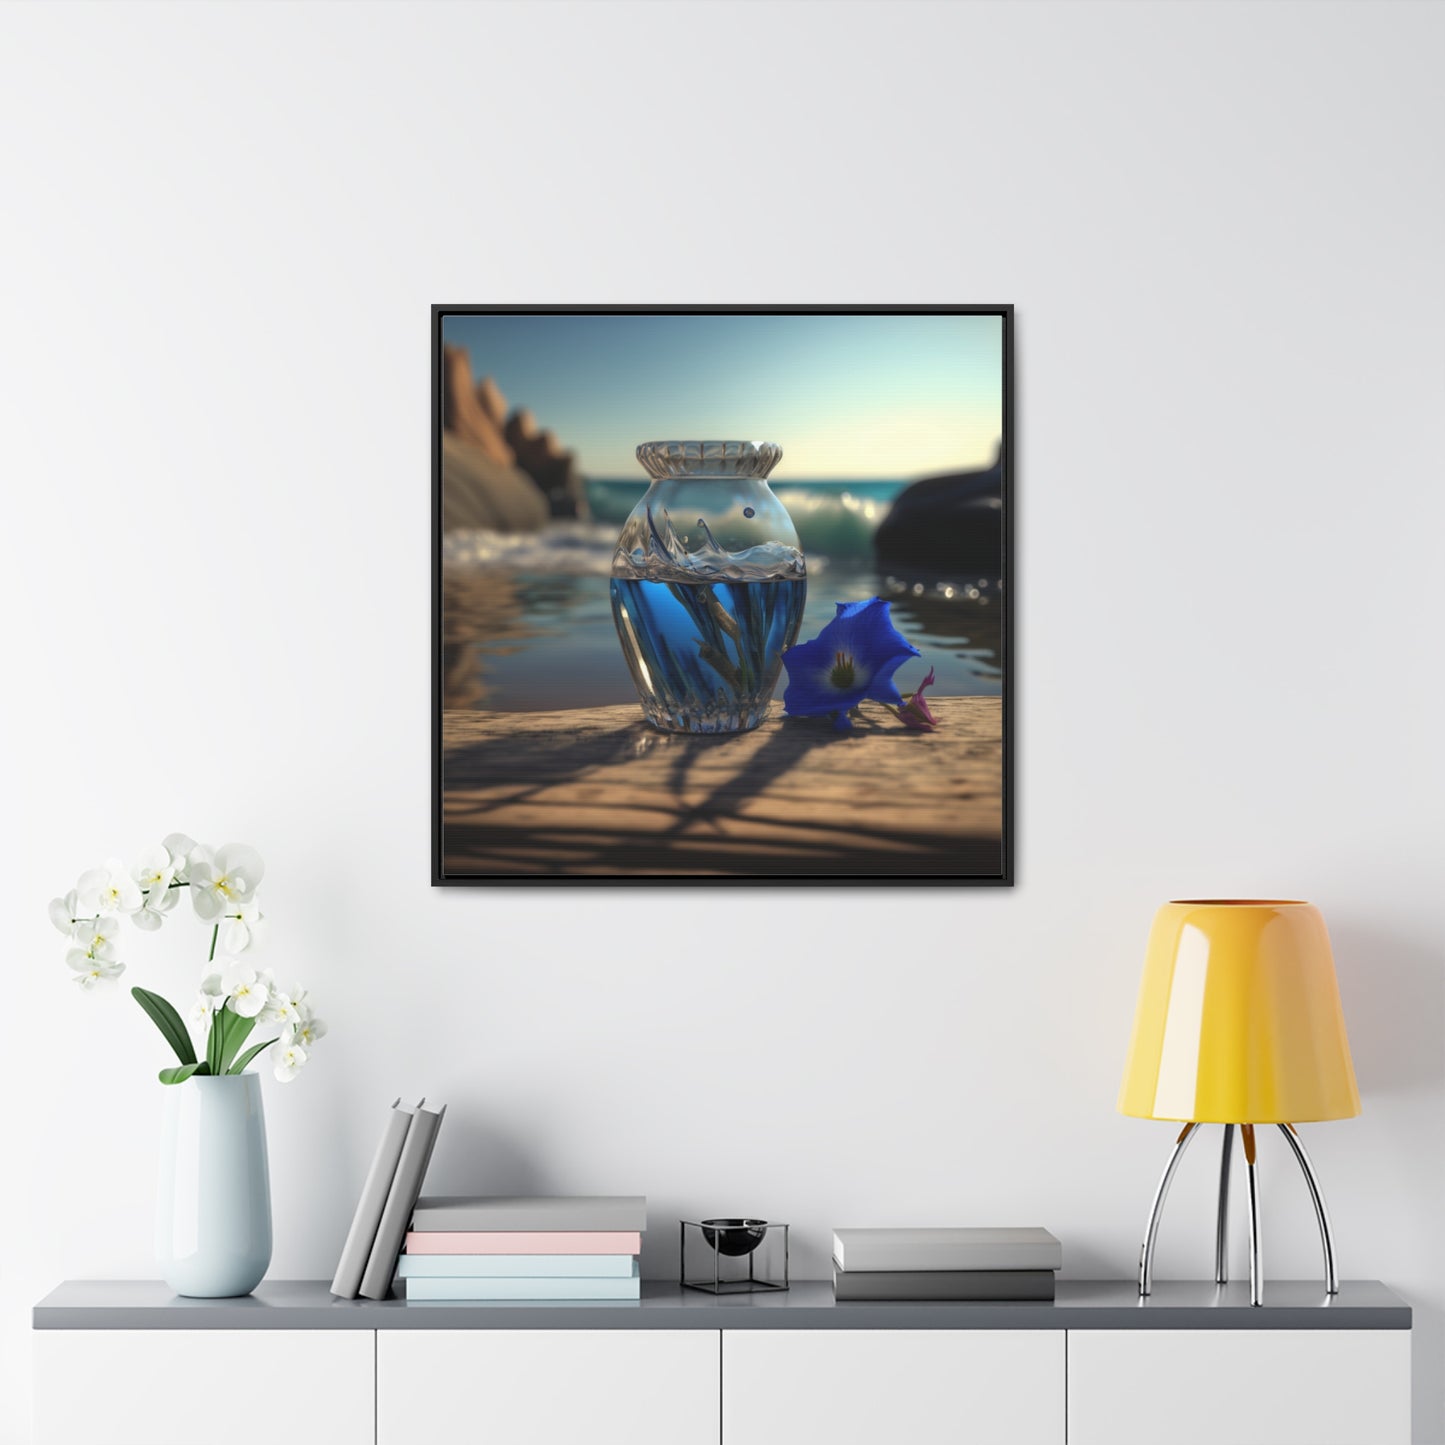 Gallery Canvas Wraps, Square Frame Bluebell 1